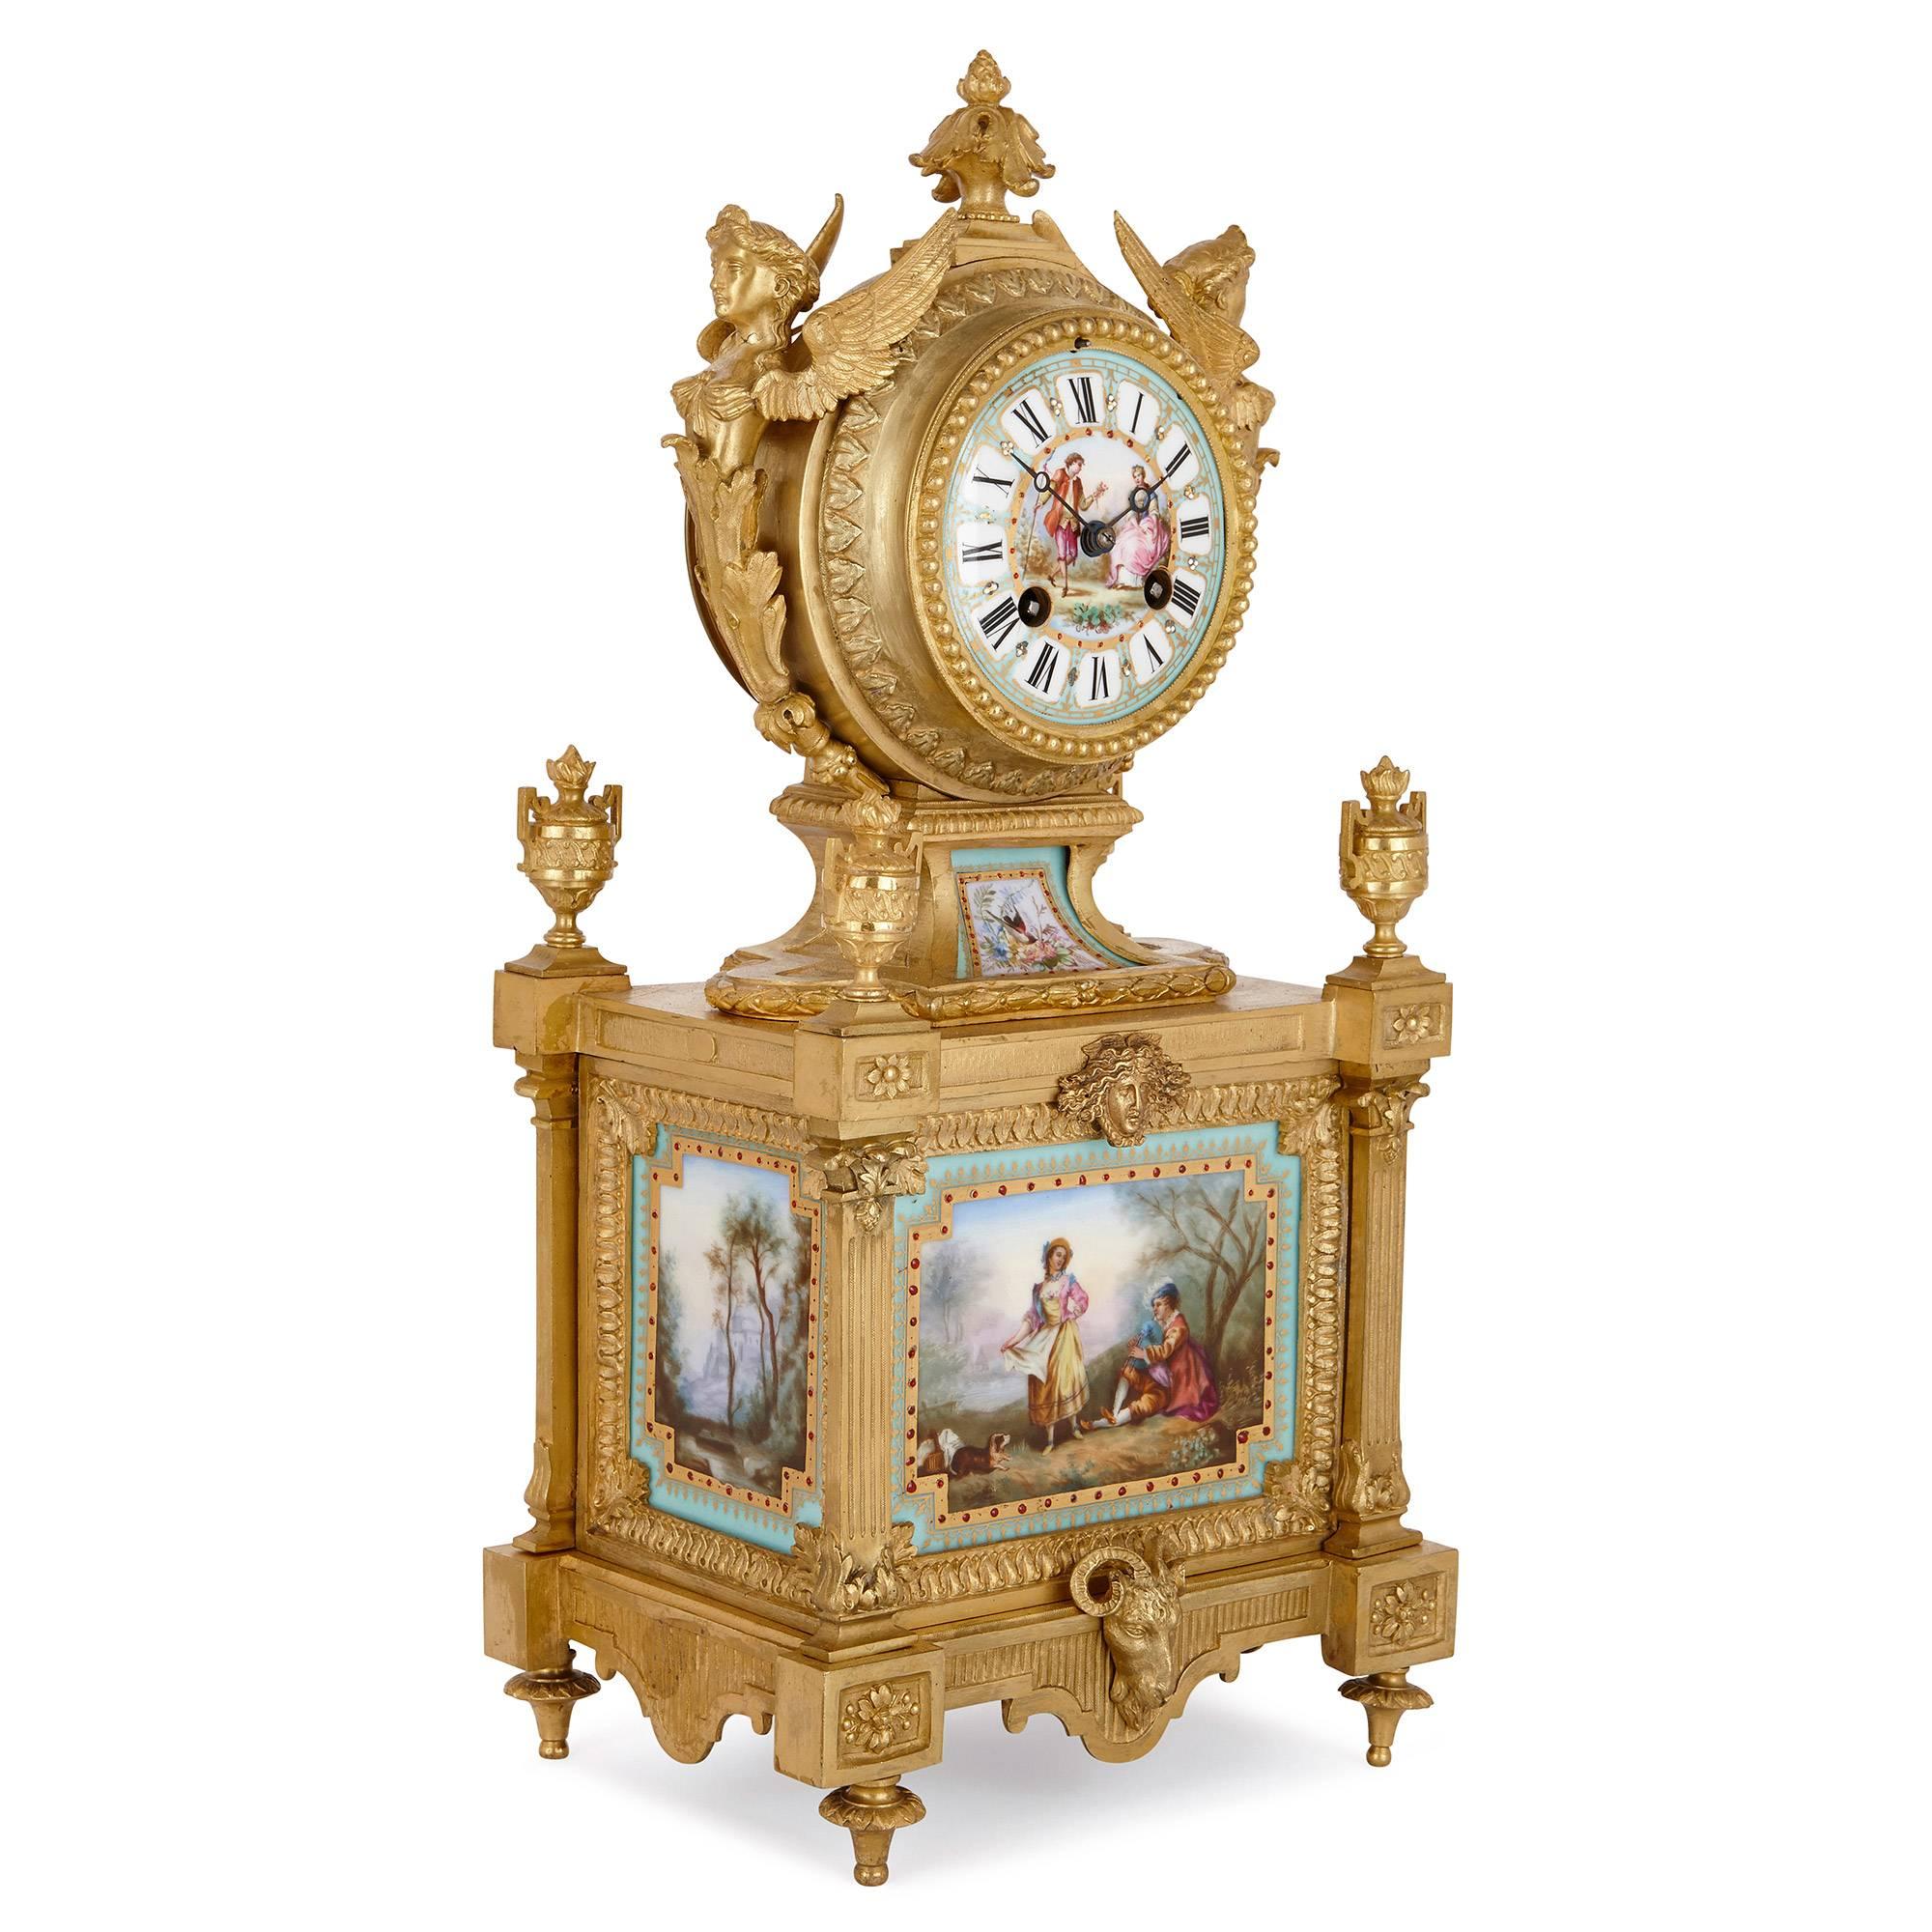 This fine neoclassical style mantel clock will make a sumptuous addition to a grand room, or could be given as a unique gift to a loved one. The clock is the work of Ernest Royer, an important French maker active in the second half of the 19th